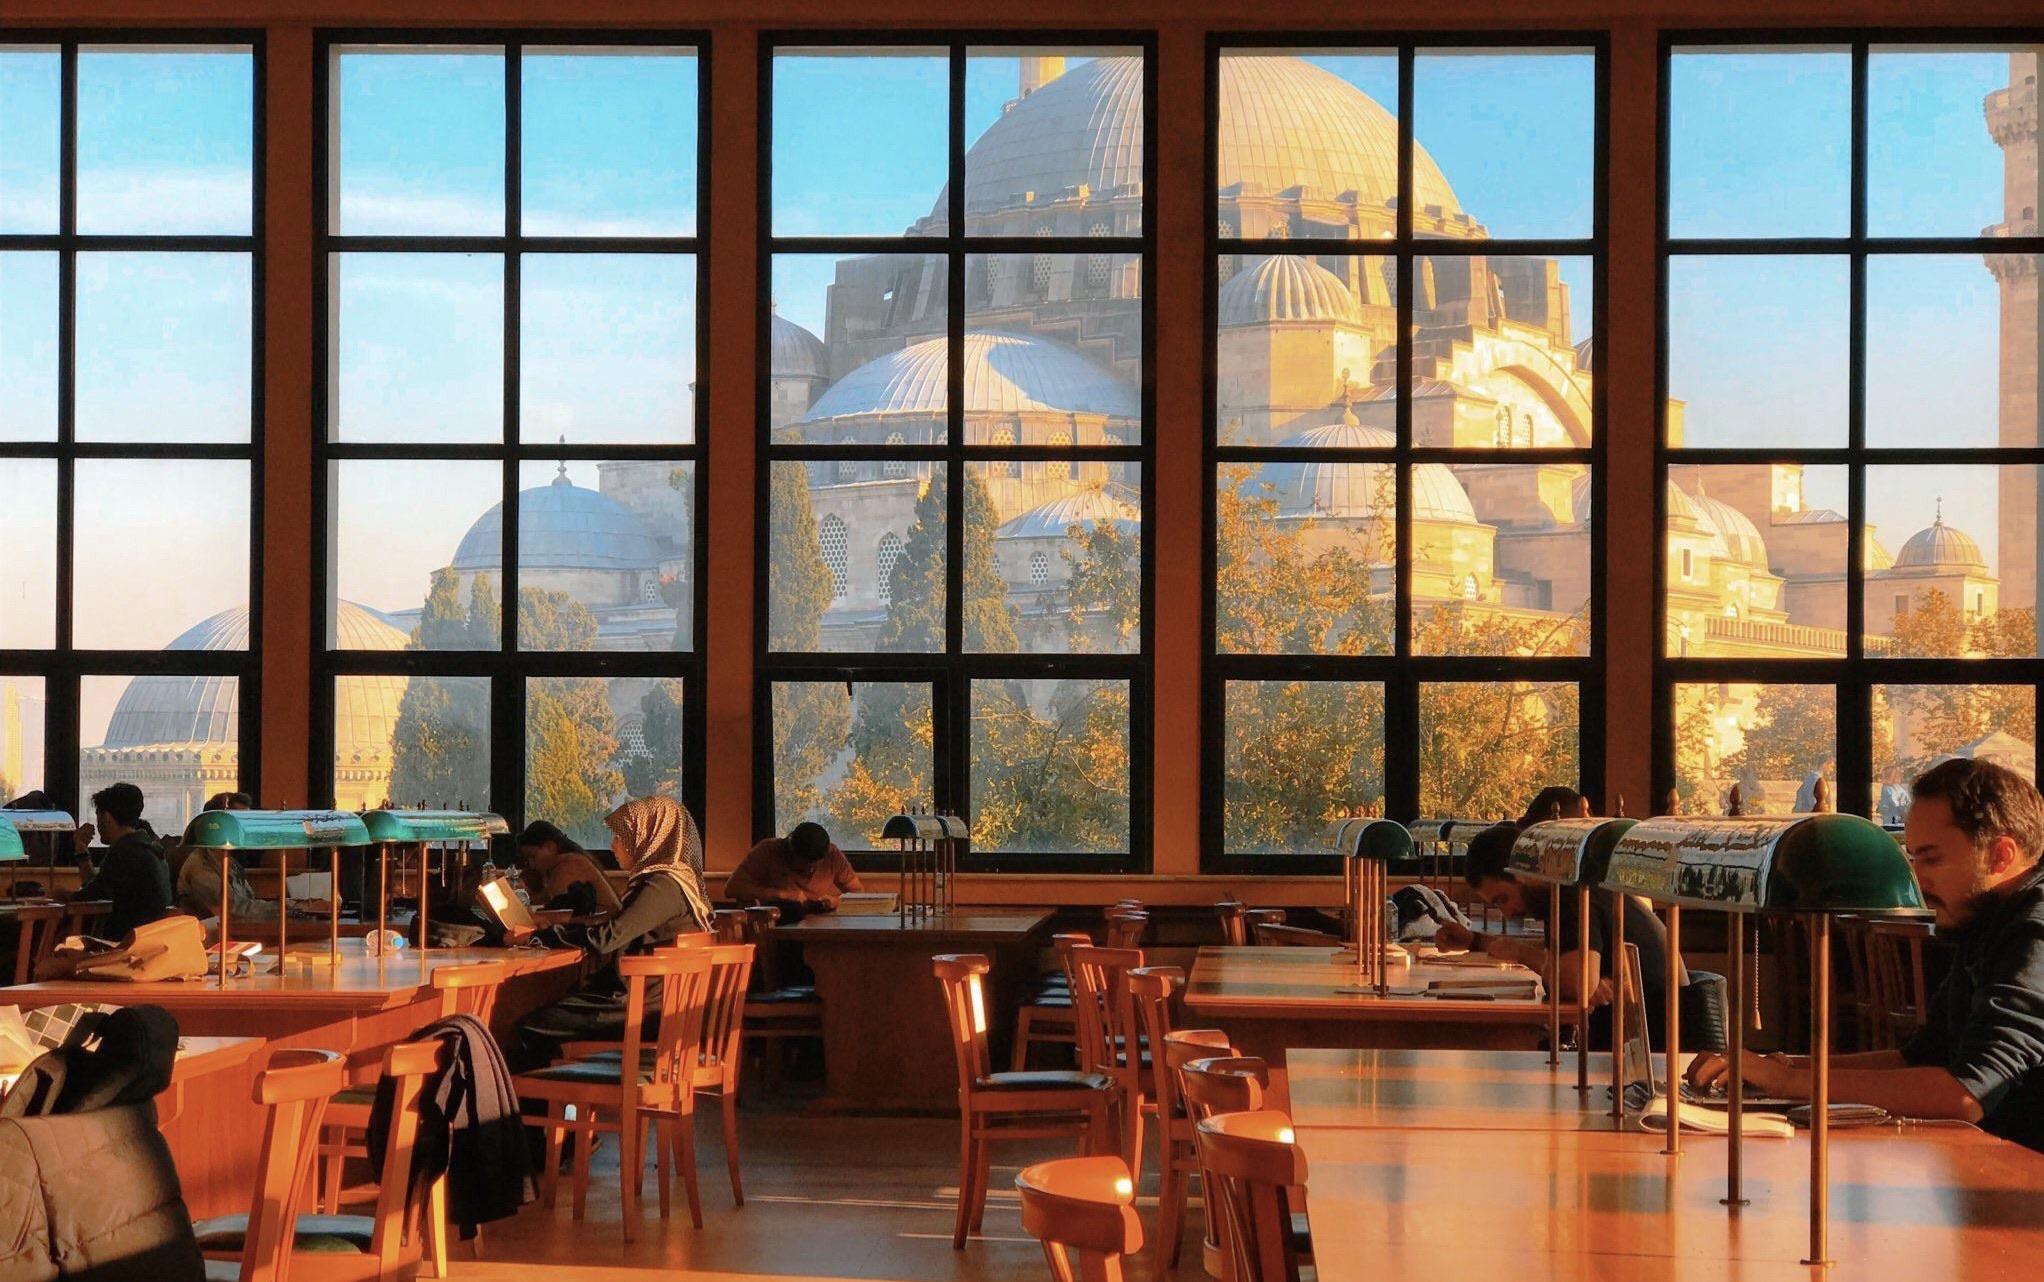 People 2044x1282 Istanbul Turkey library university people students mosque chair table lamp window Süleymaniye Mosque studying trees